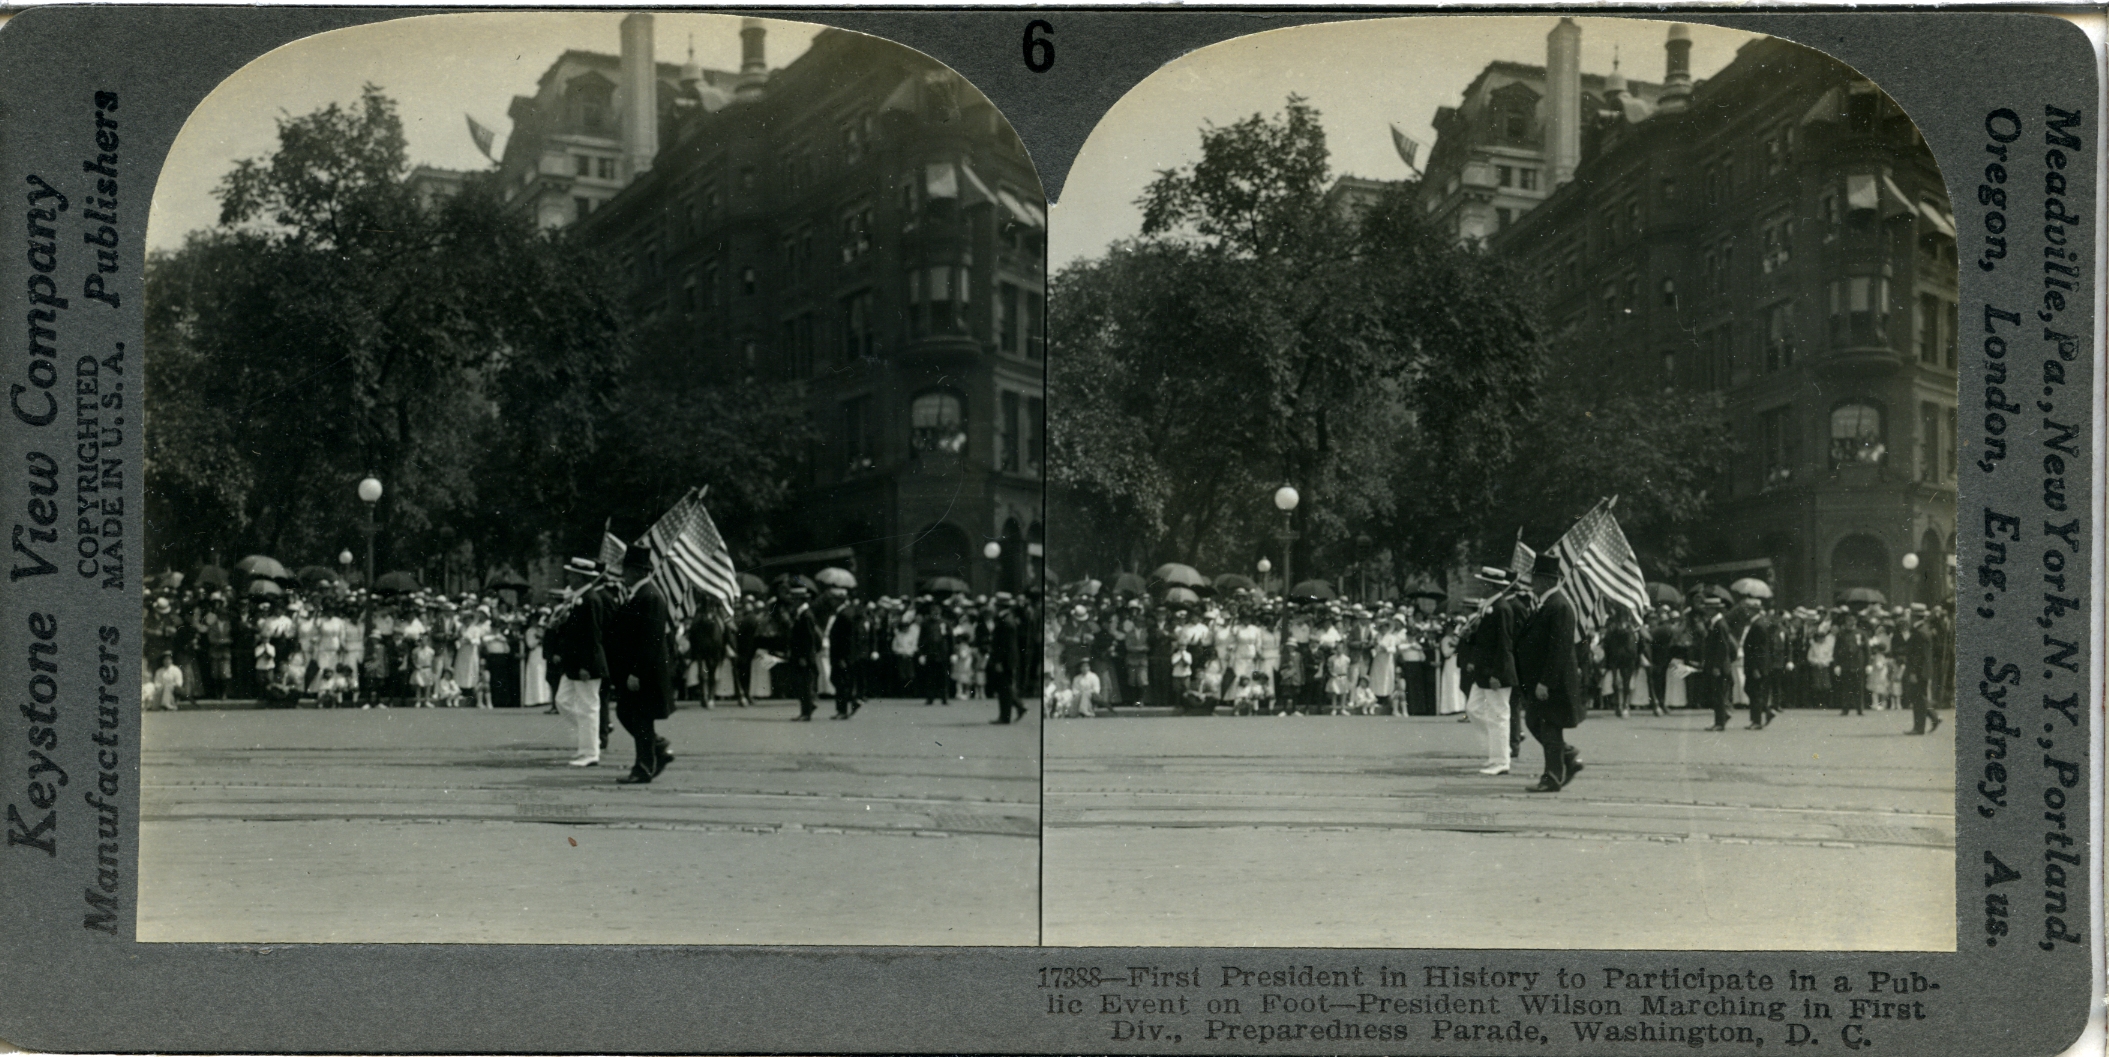 First President in History to Participate in a Public Parade - Even on Foot--President Wilson Marching in First Division, Preparedness Parade, Washington, D.C. June 14th, 1916